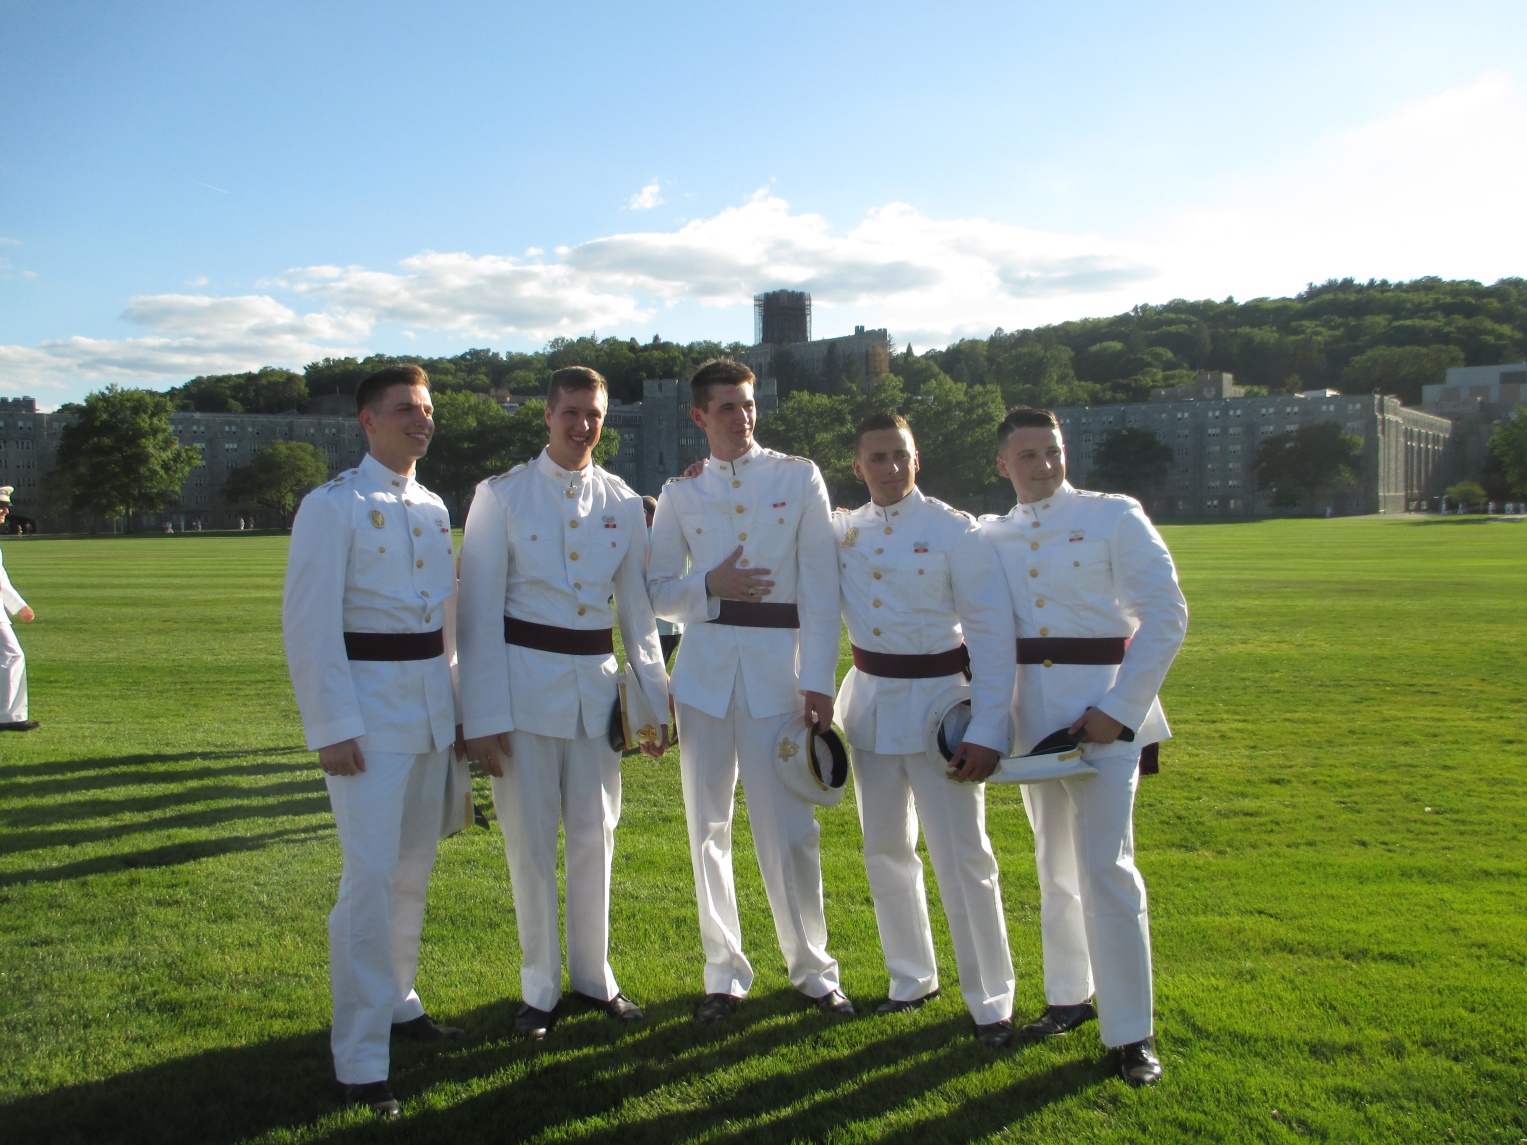 Nathan, my brother, and the U.S. army in West Point, New York.